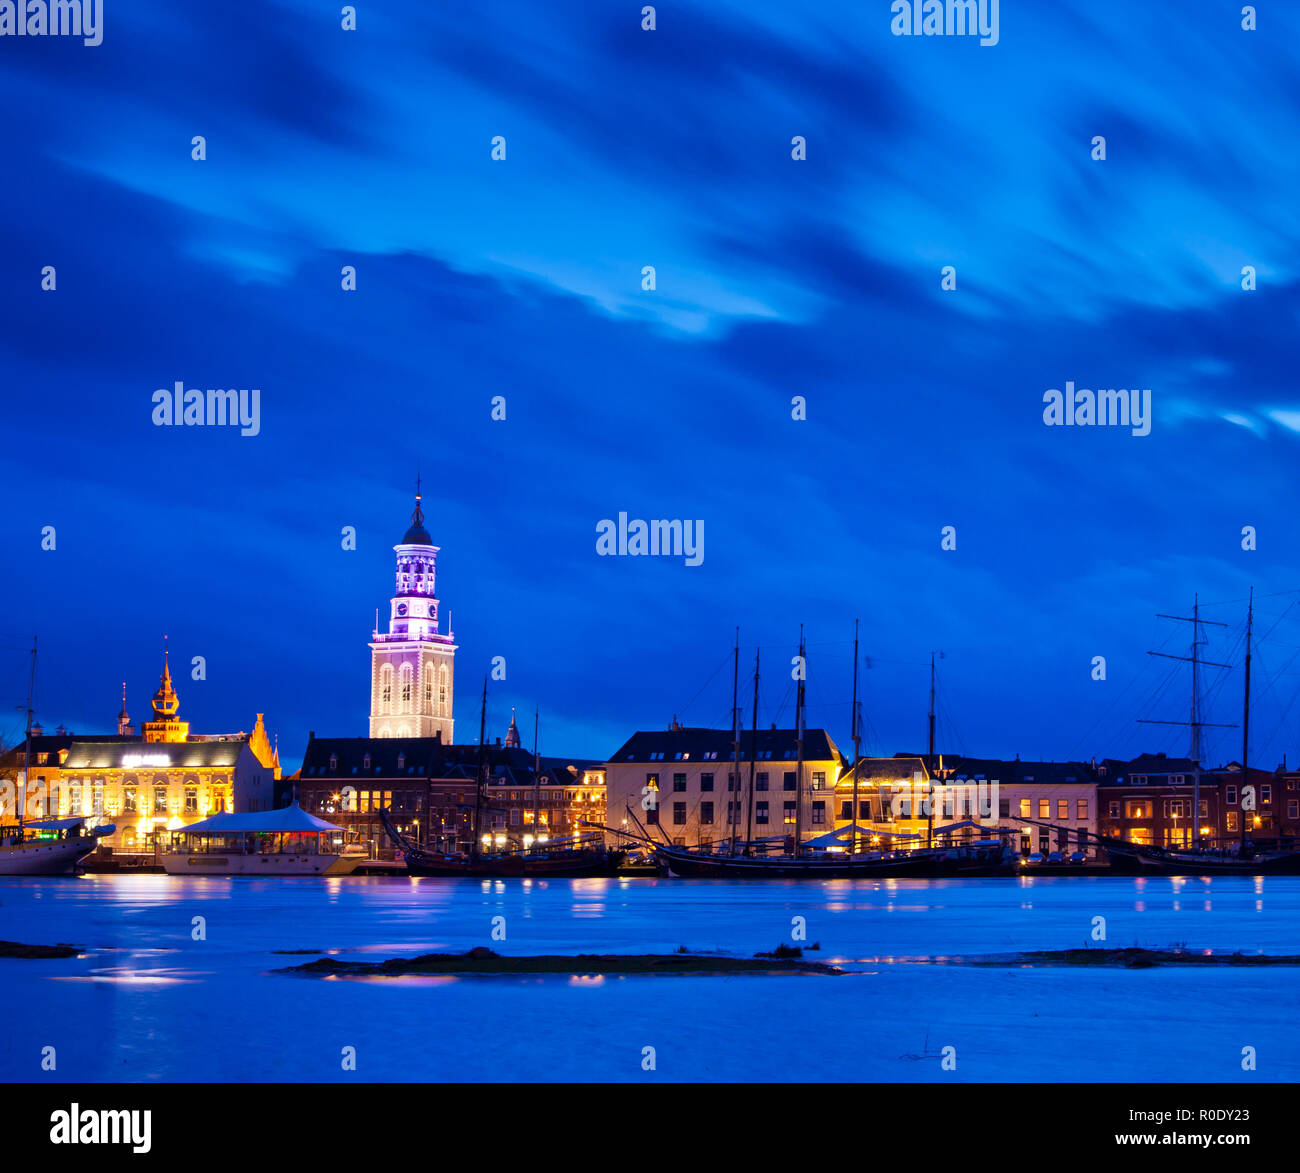 Old Wooden Sailing Ships on the Riverside in the Historical City of Kampen, Overijssel, Netherlands by Night Stock Photo